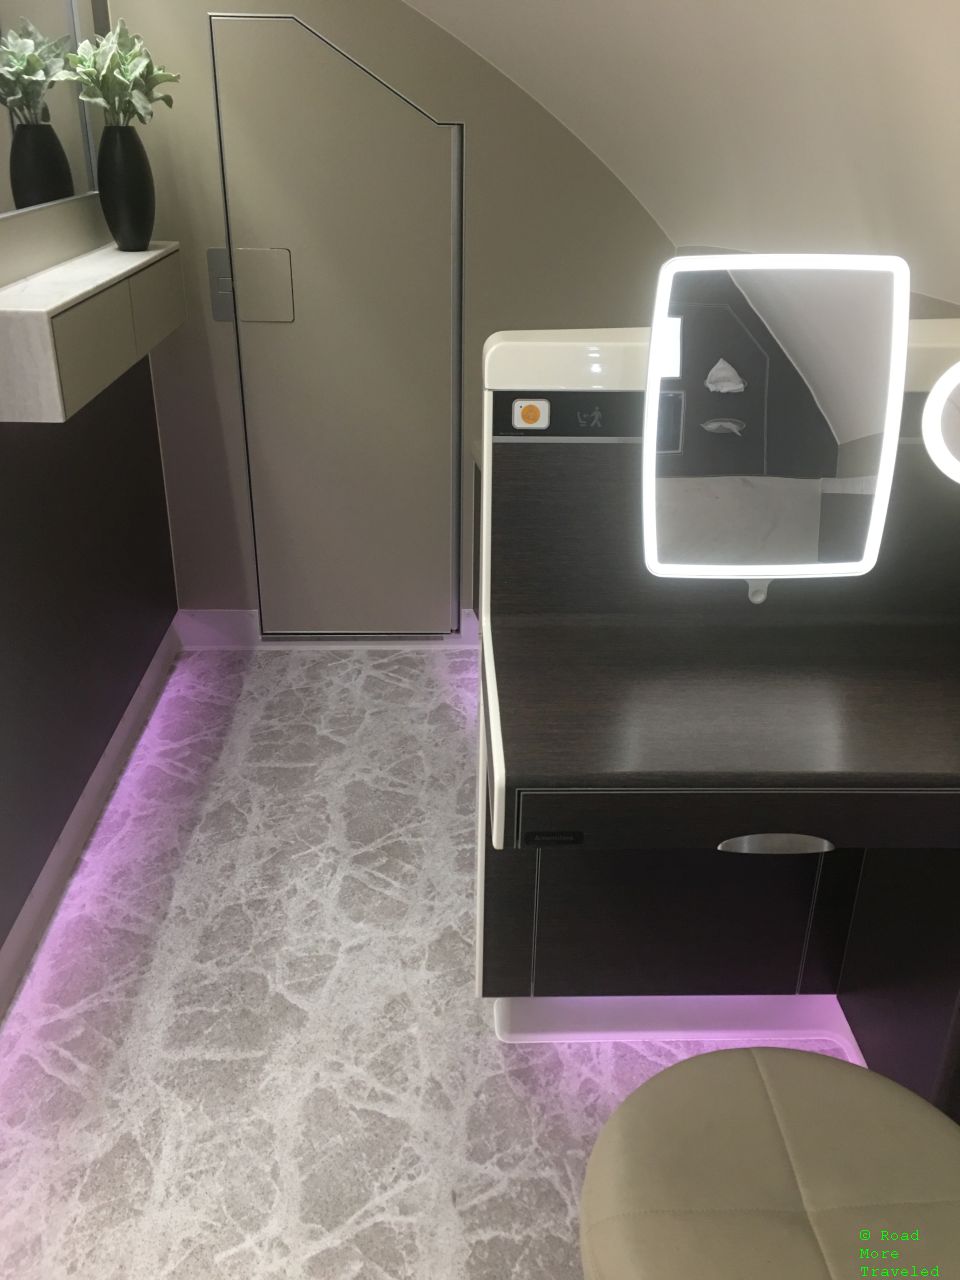 Singapore Airlines A380 Suites Class - lavatory sitting area